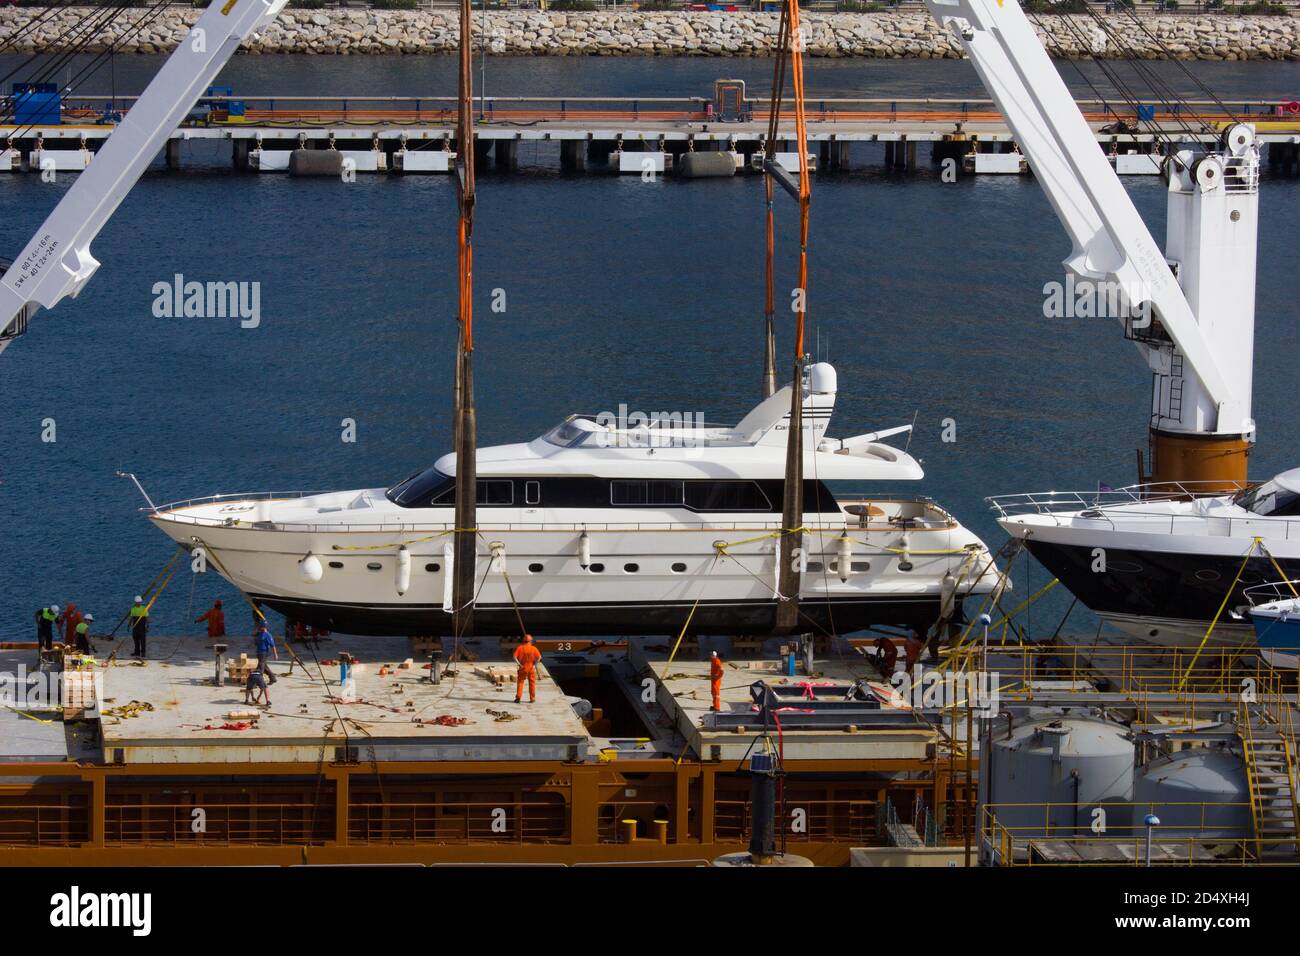 Luxury power boat / yacht being loaded onto a barge in Gibraltar harbour for transport or delivery Stock Photo